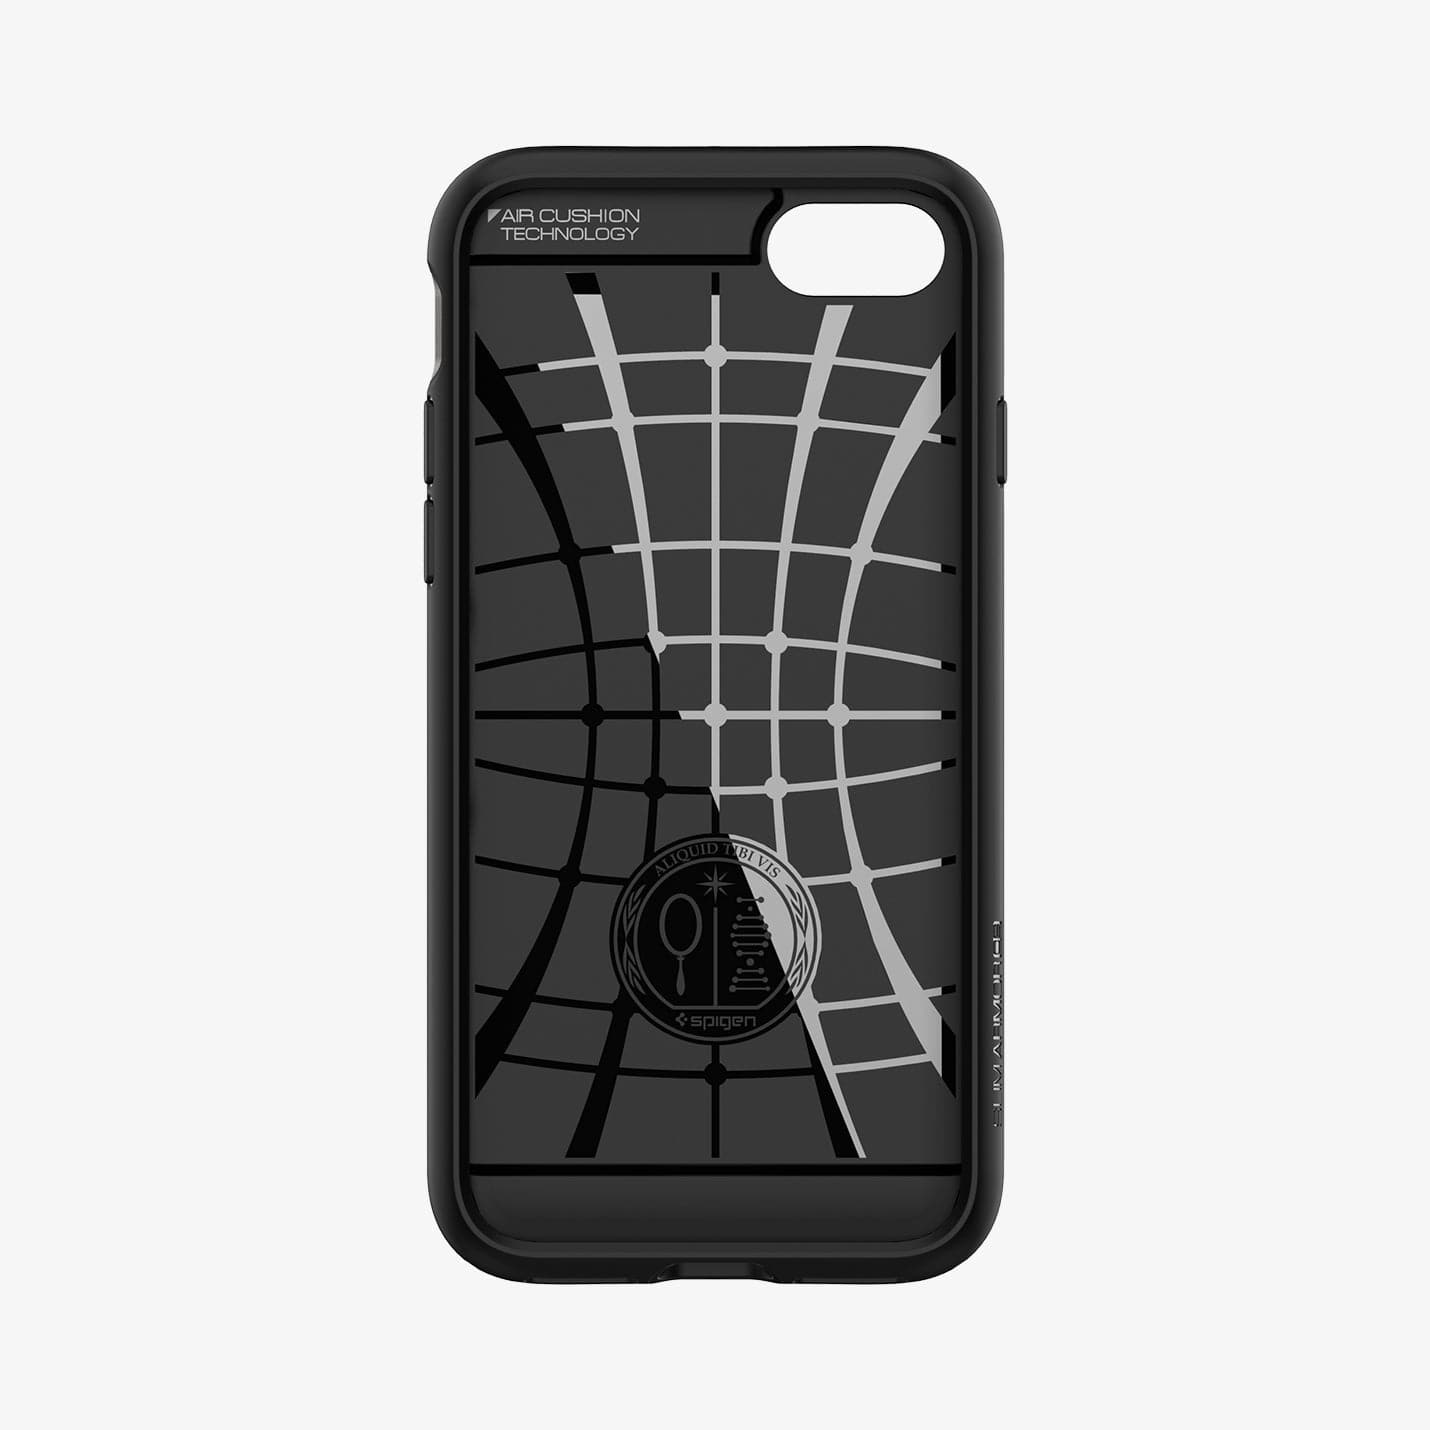 042CS20453 - iPhone 7 Series Slim Armor CS Case in Gunmetal showing the inner case with spider web pattern